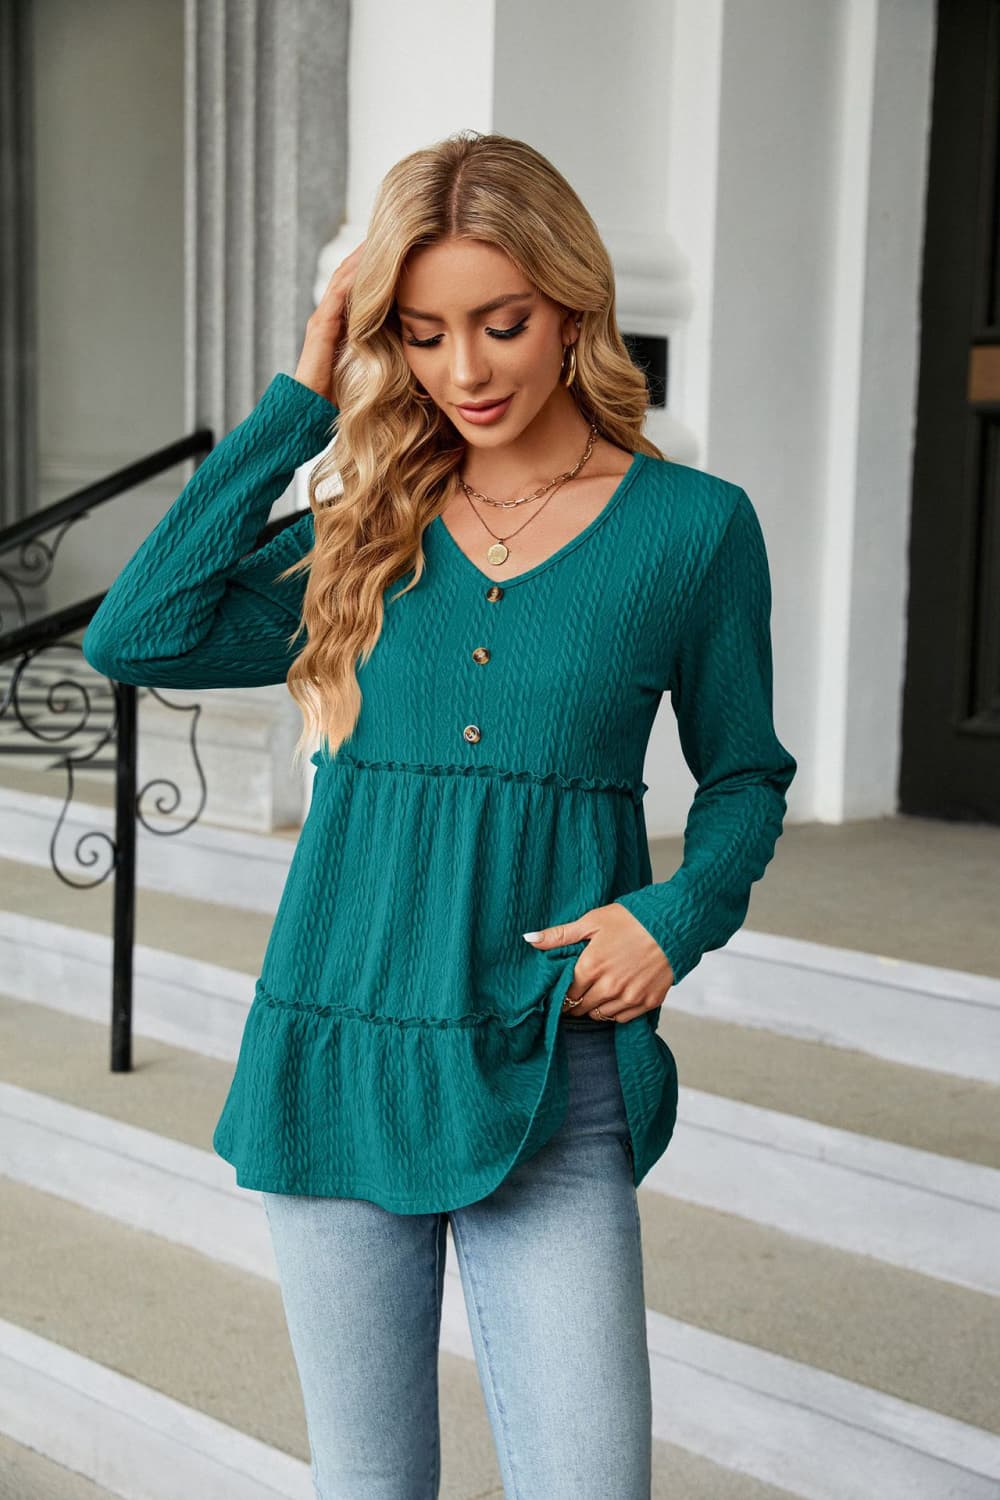 Long Sleeve V-Neck Cable-Knit Blouse - Women’s Clothing & Accessories - Shirts & Tops - 14 - 2024